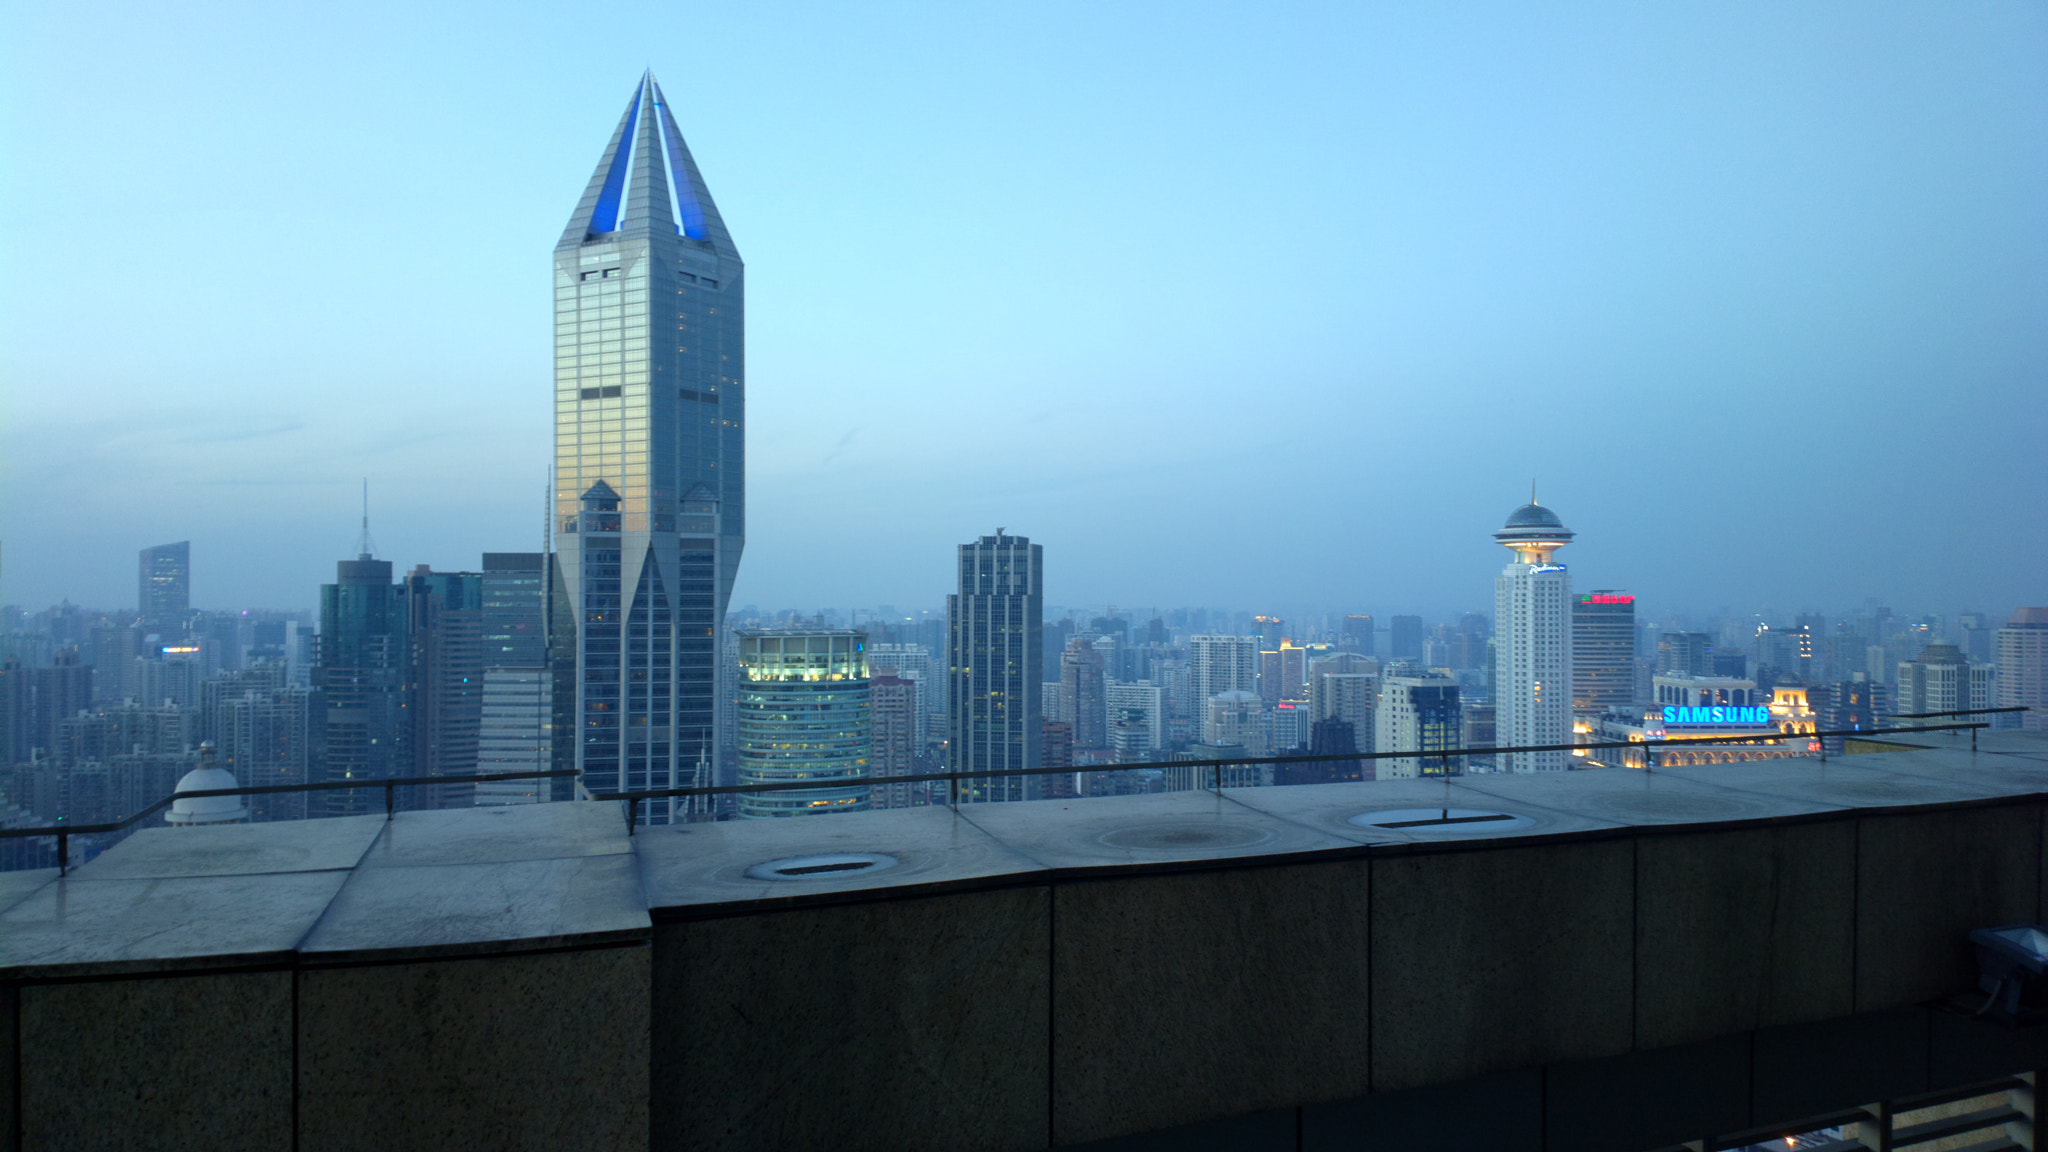 Nokia 808 sample photo. Quiet afternoon（shanghai） photography